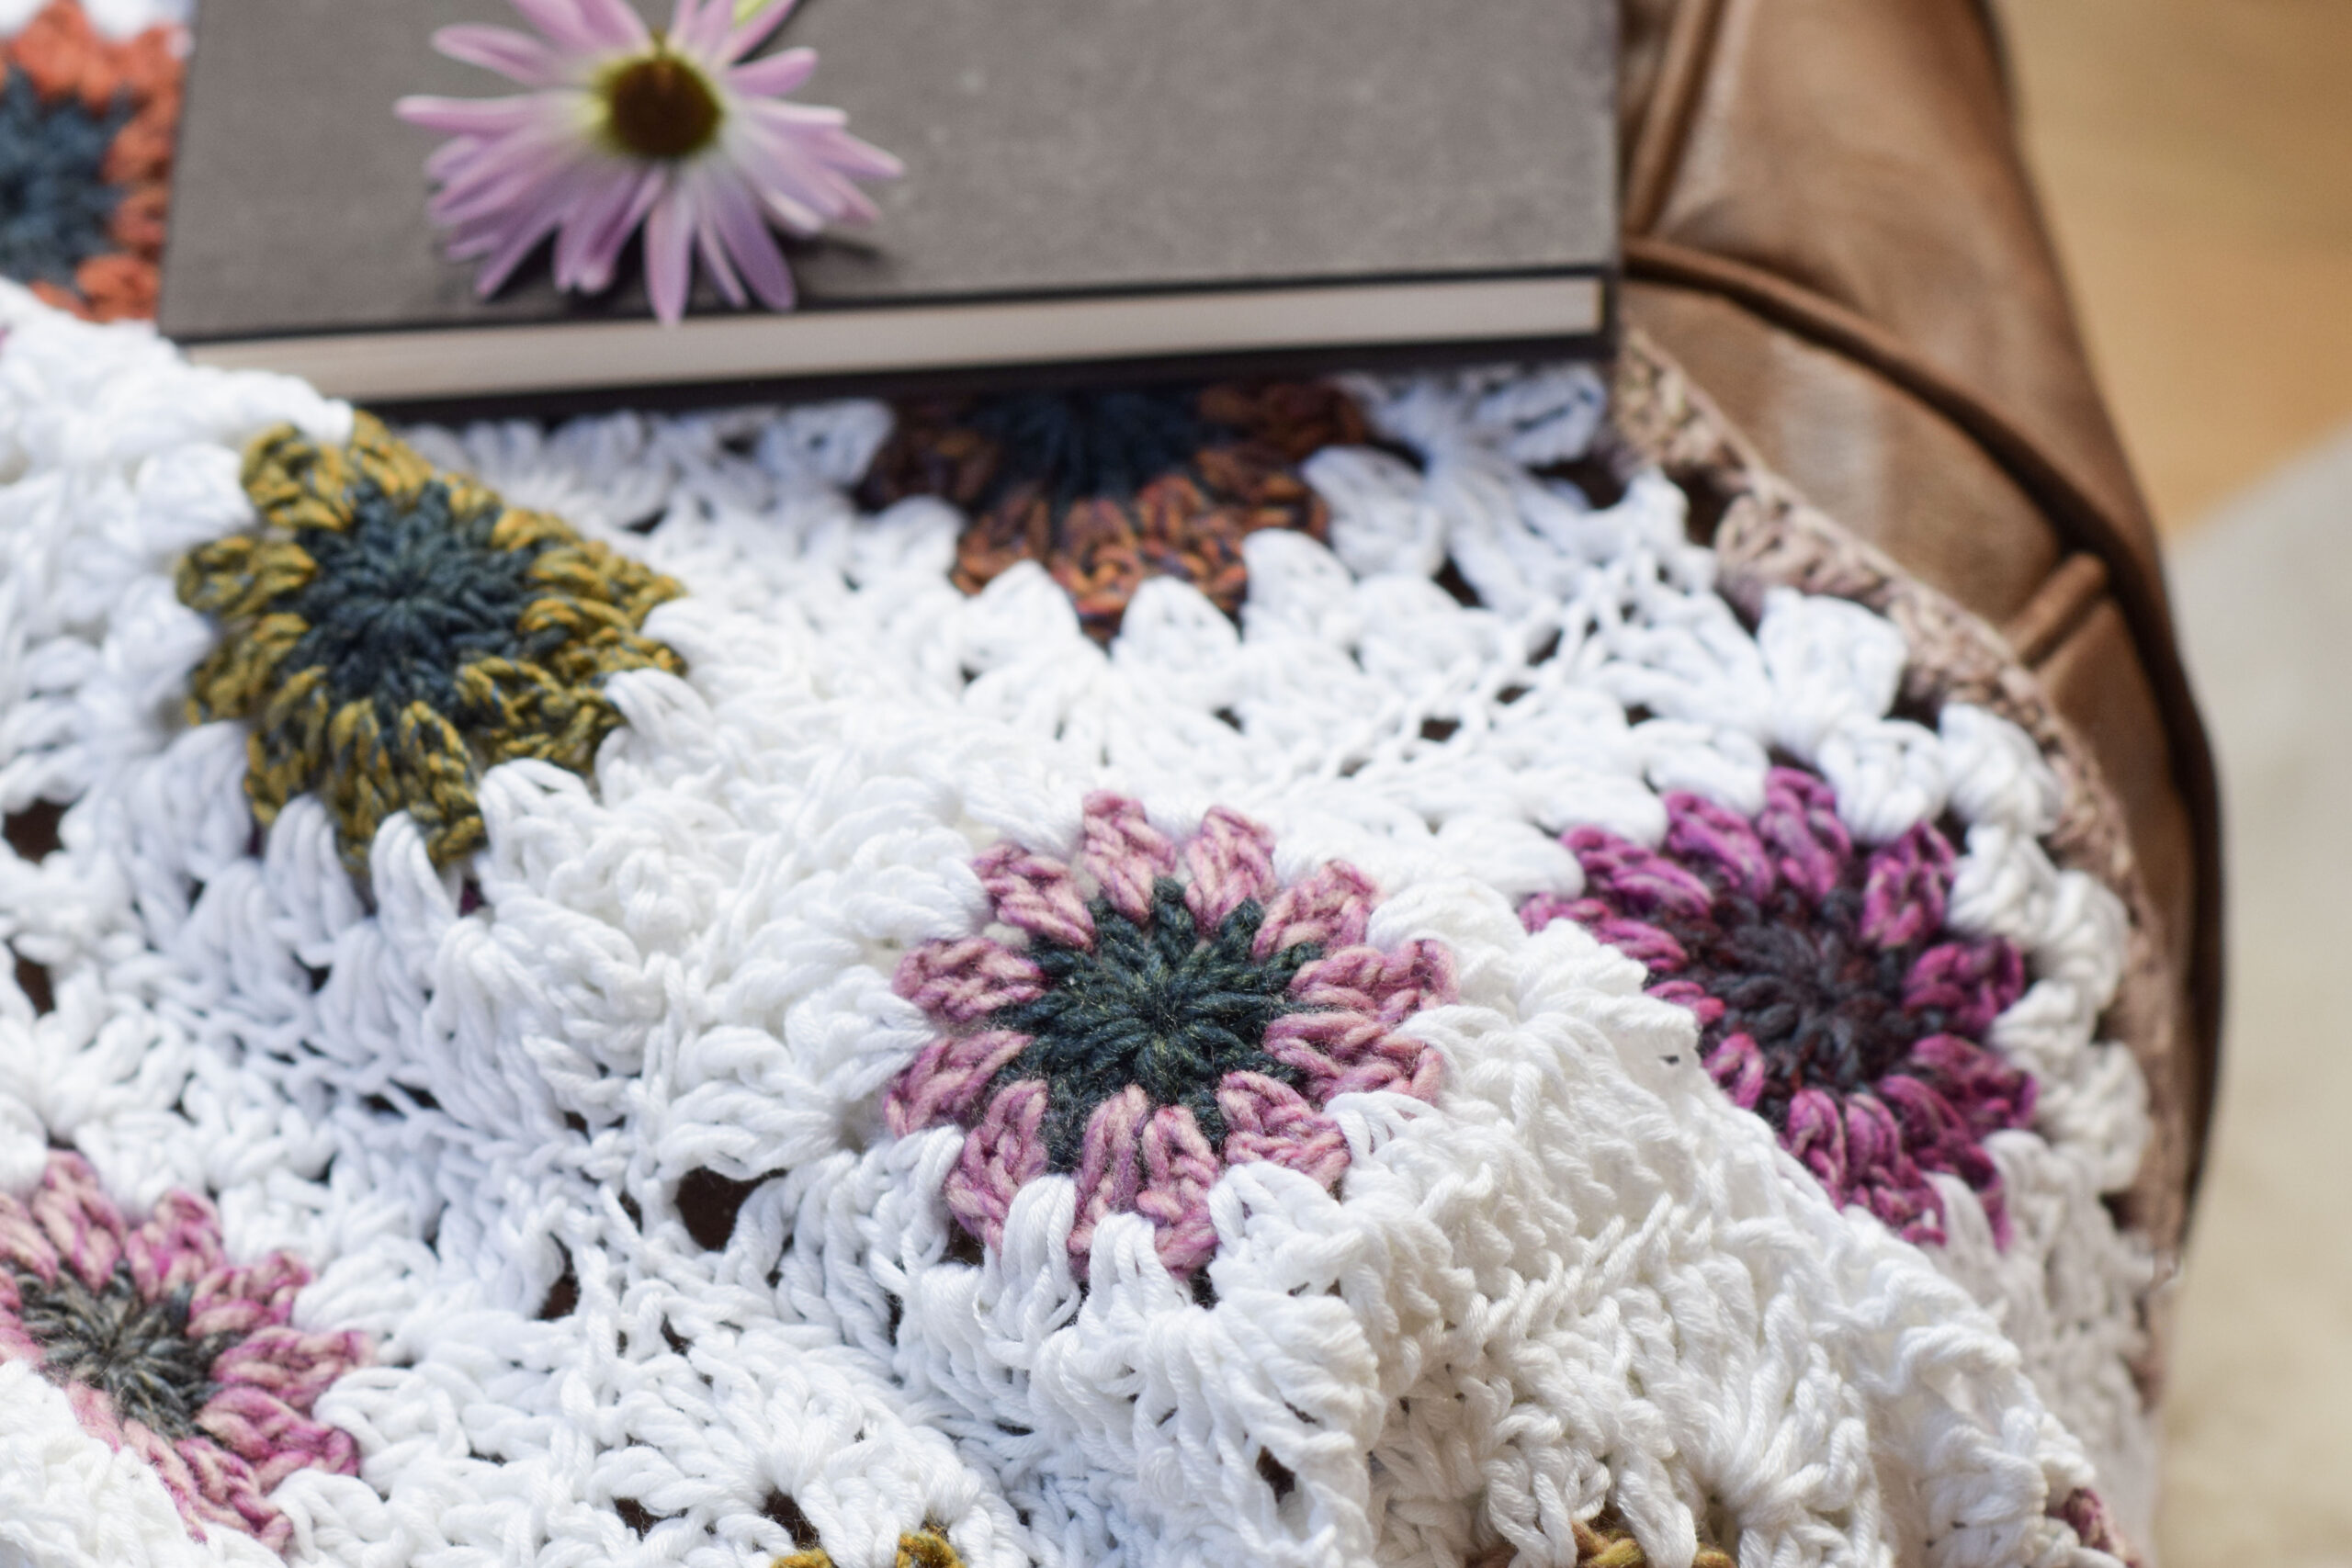 Free crochet projects for beginners from granny squares to blankets